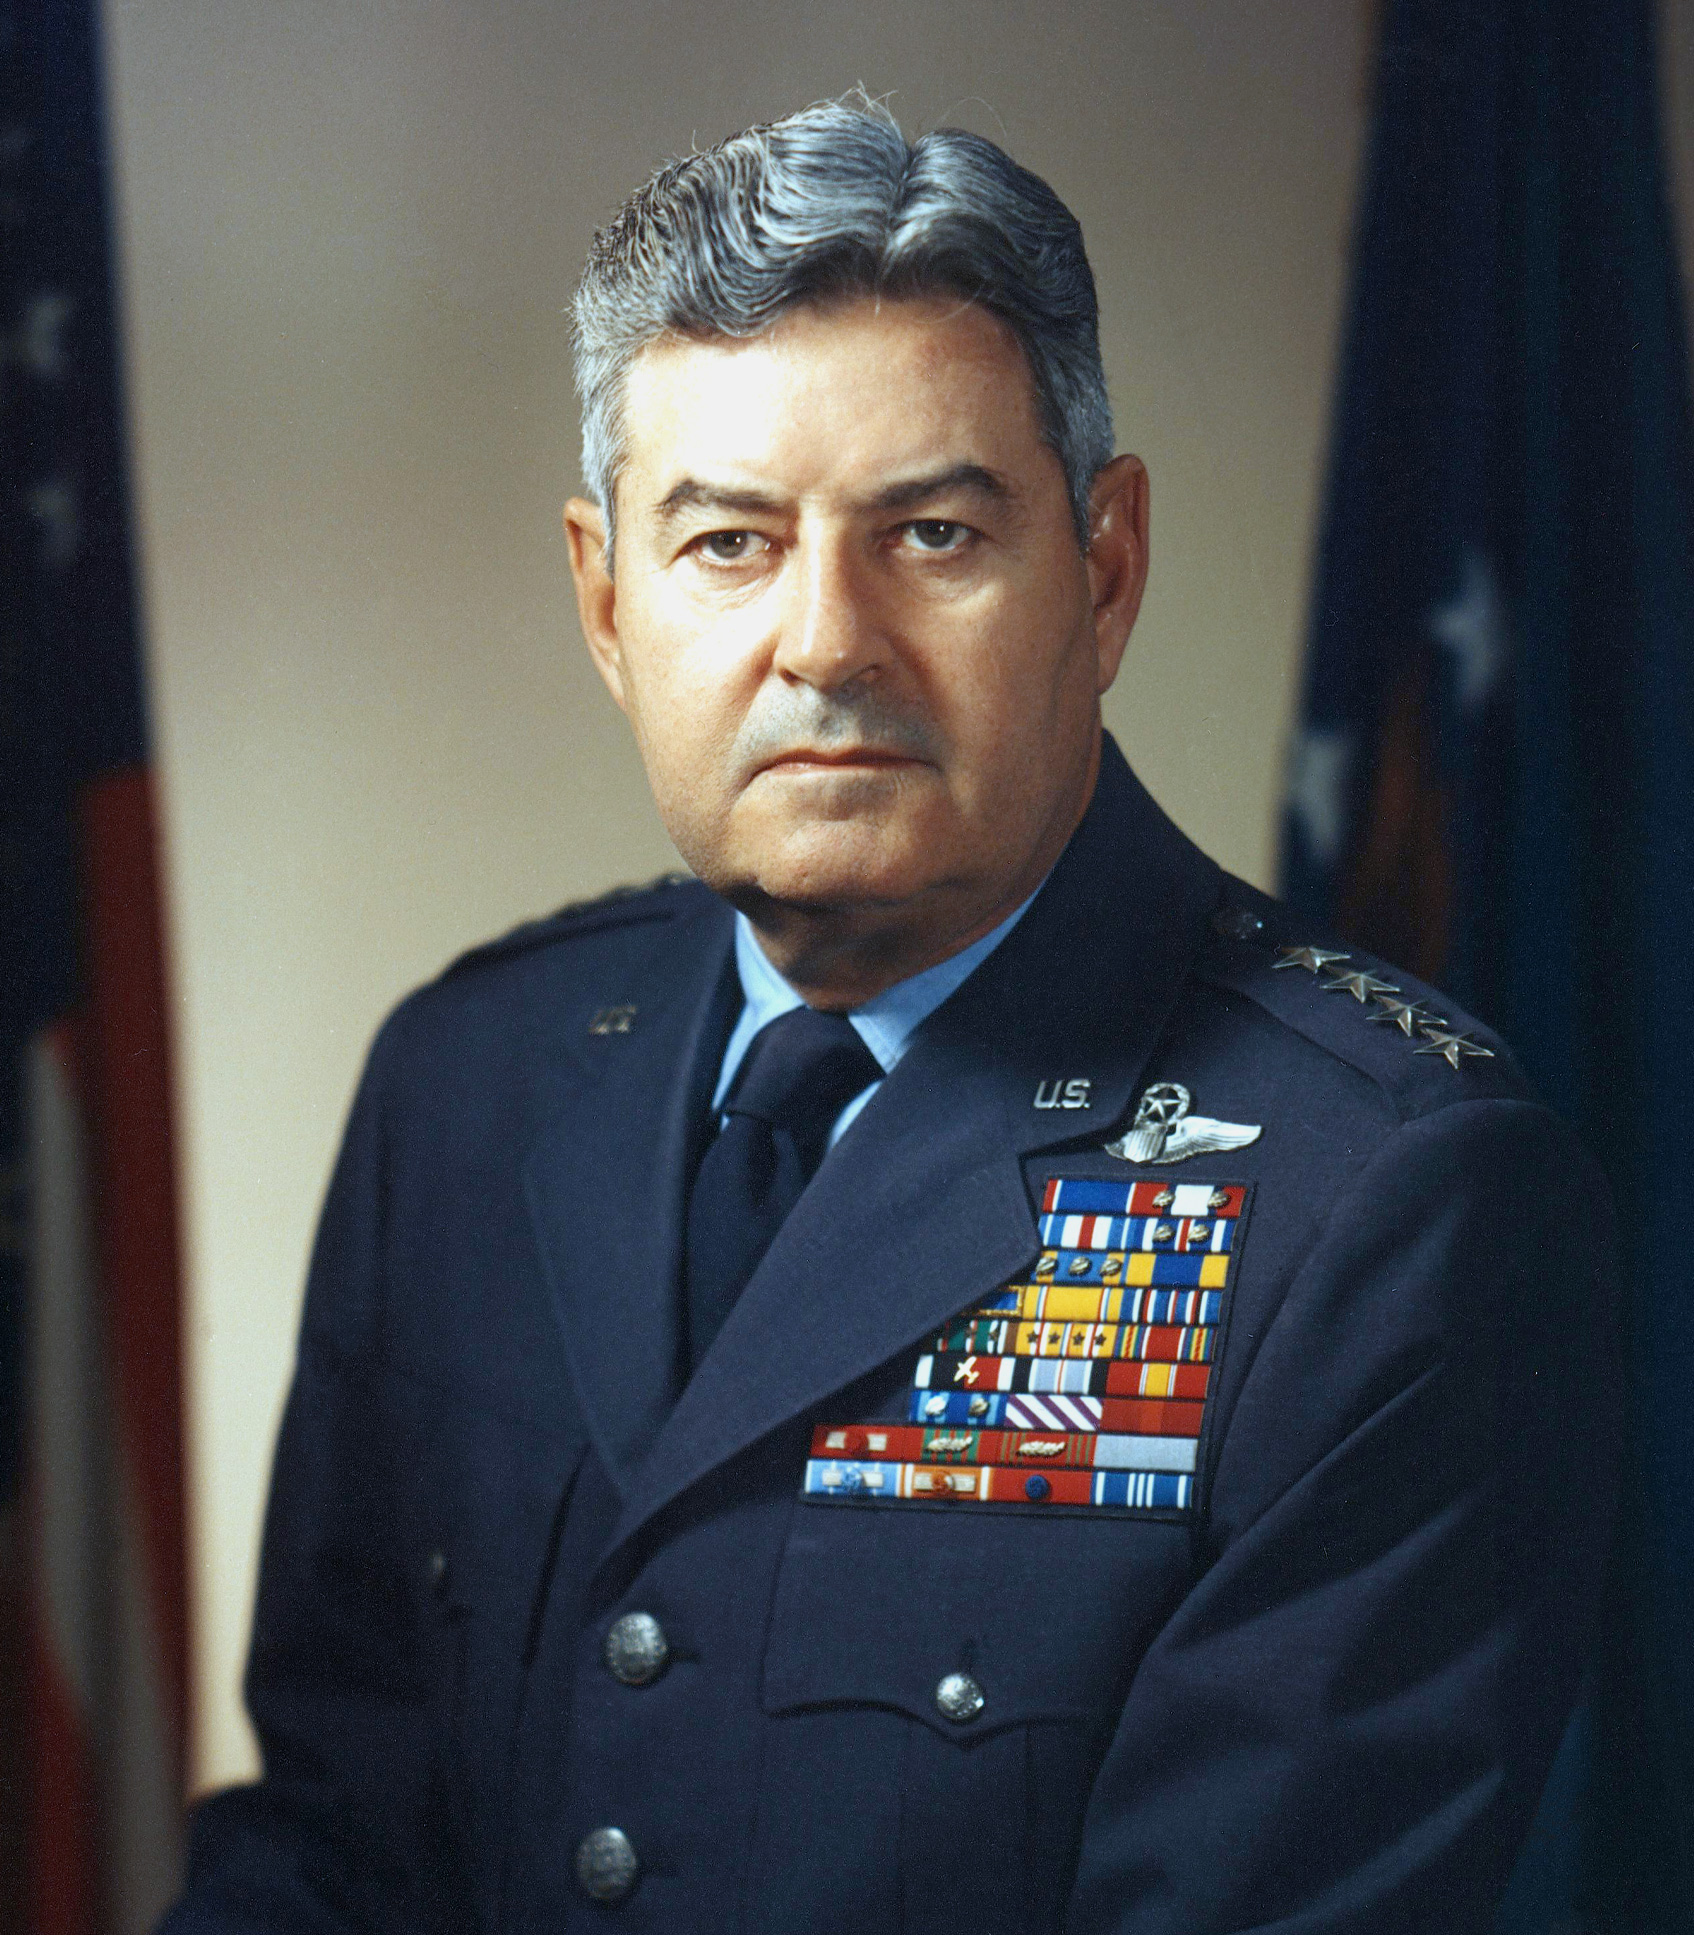 Official US Air Force portrait of Curtis LeMay, late 1950s or early 1960s